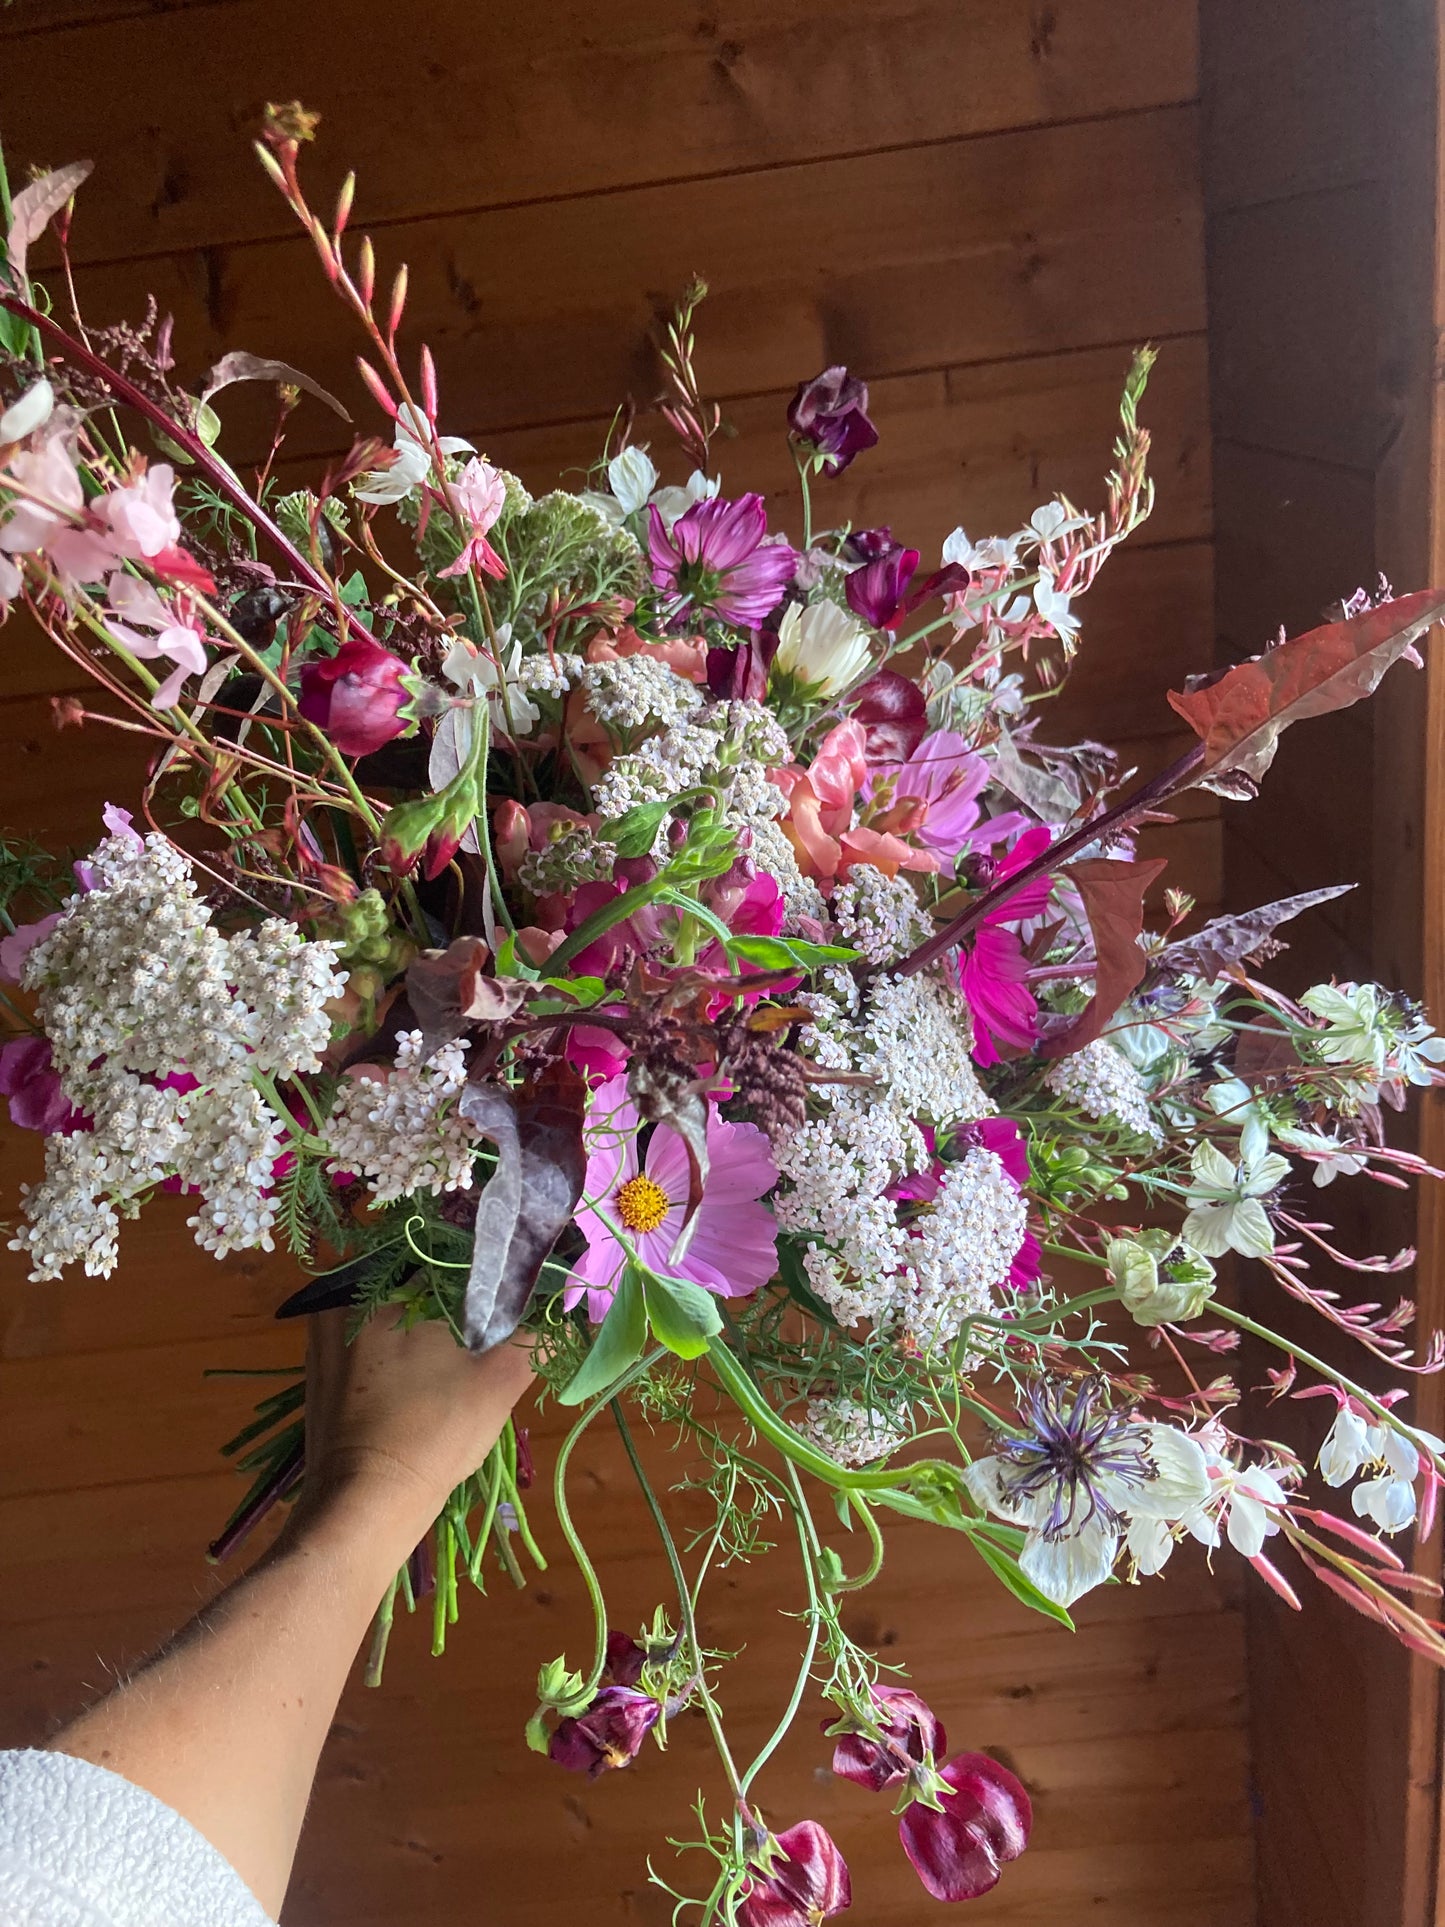 Monthly flower subscription - 5 months